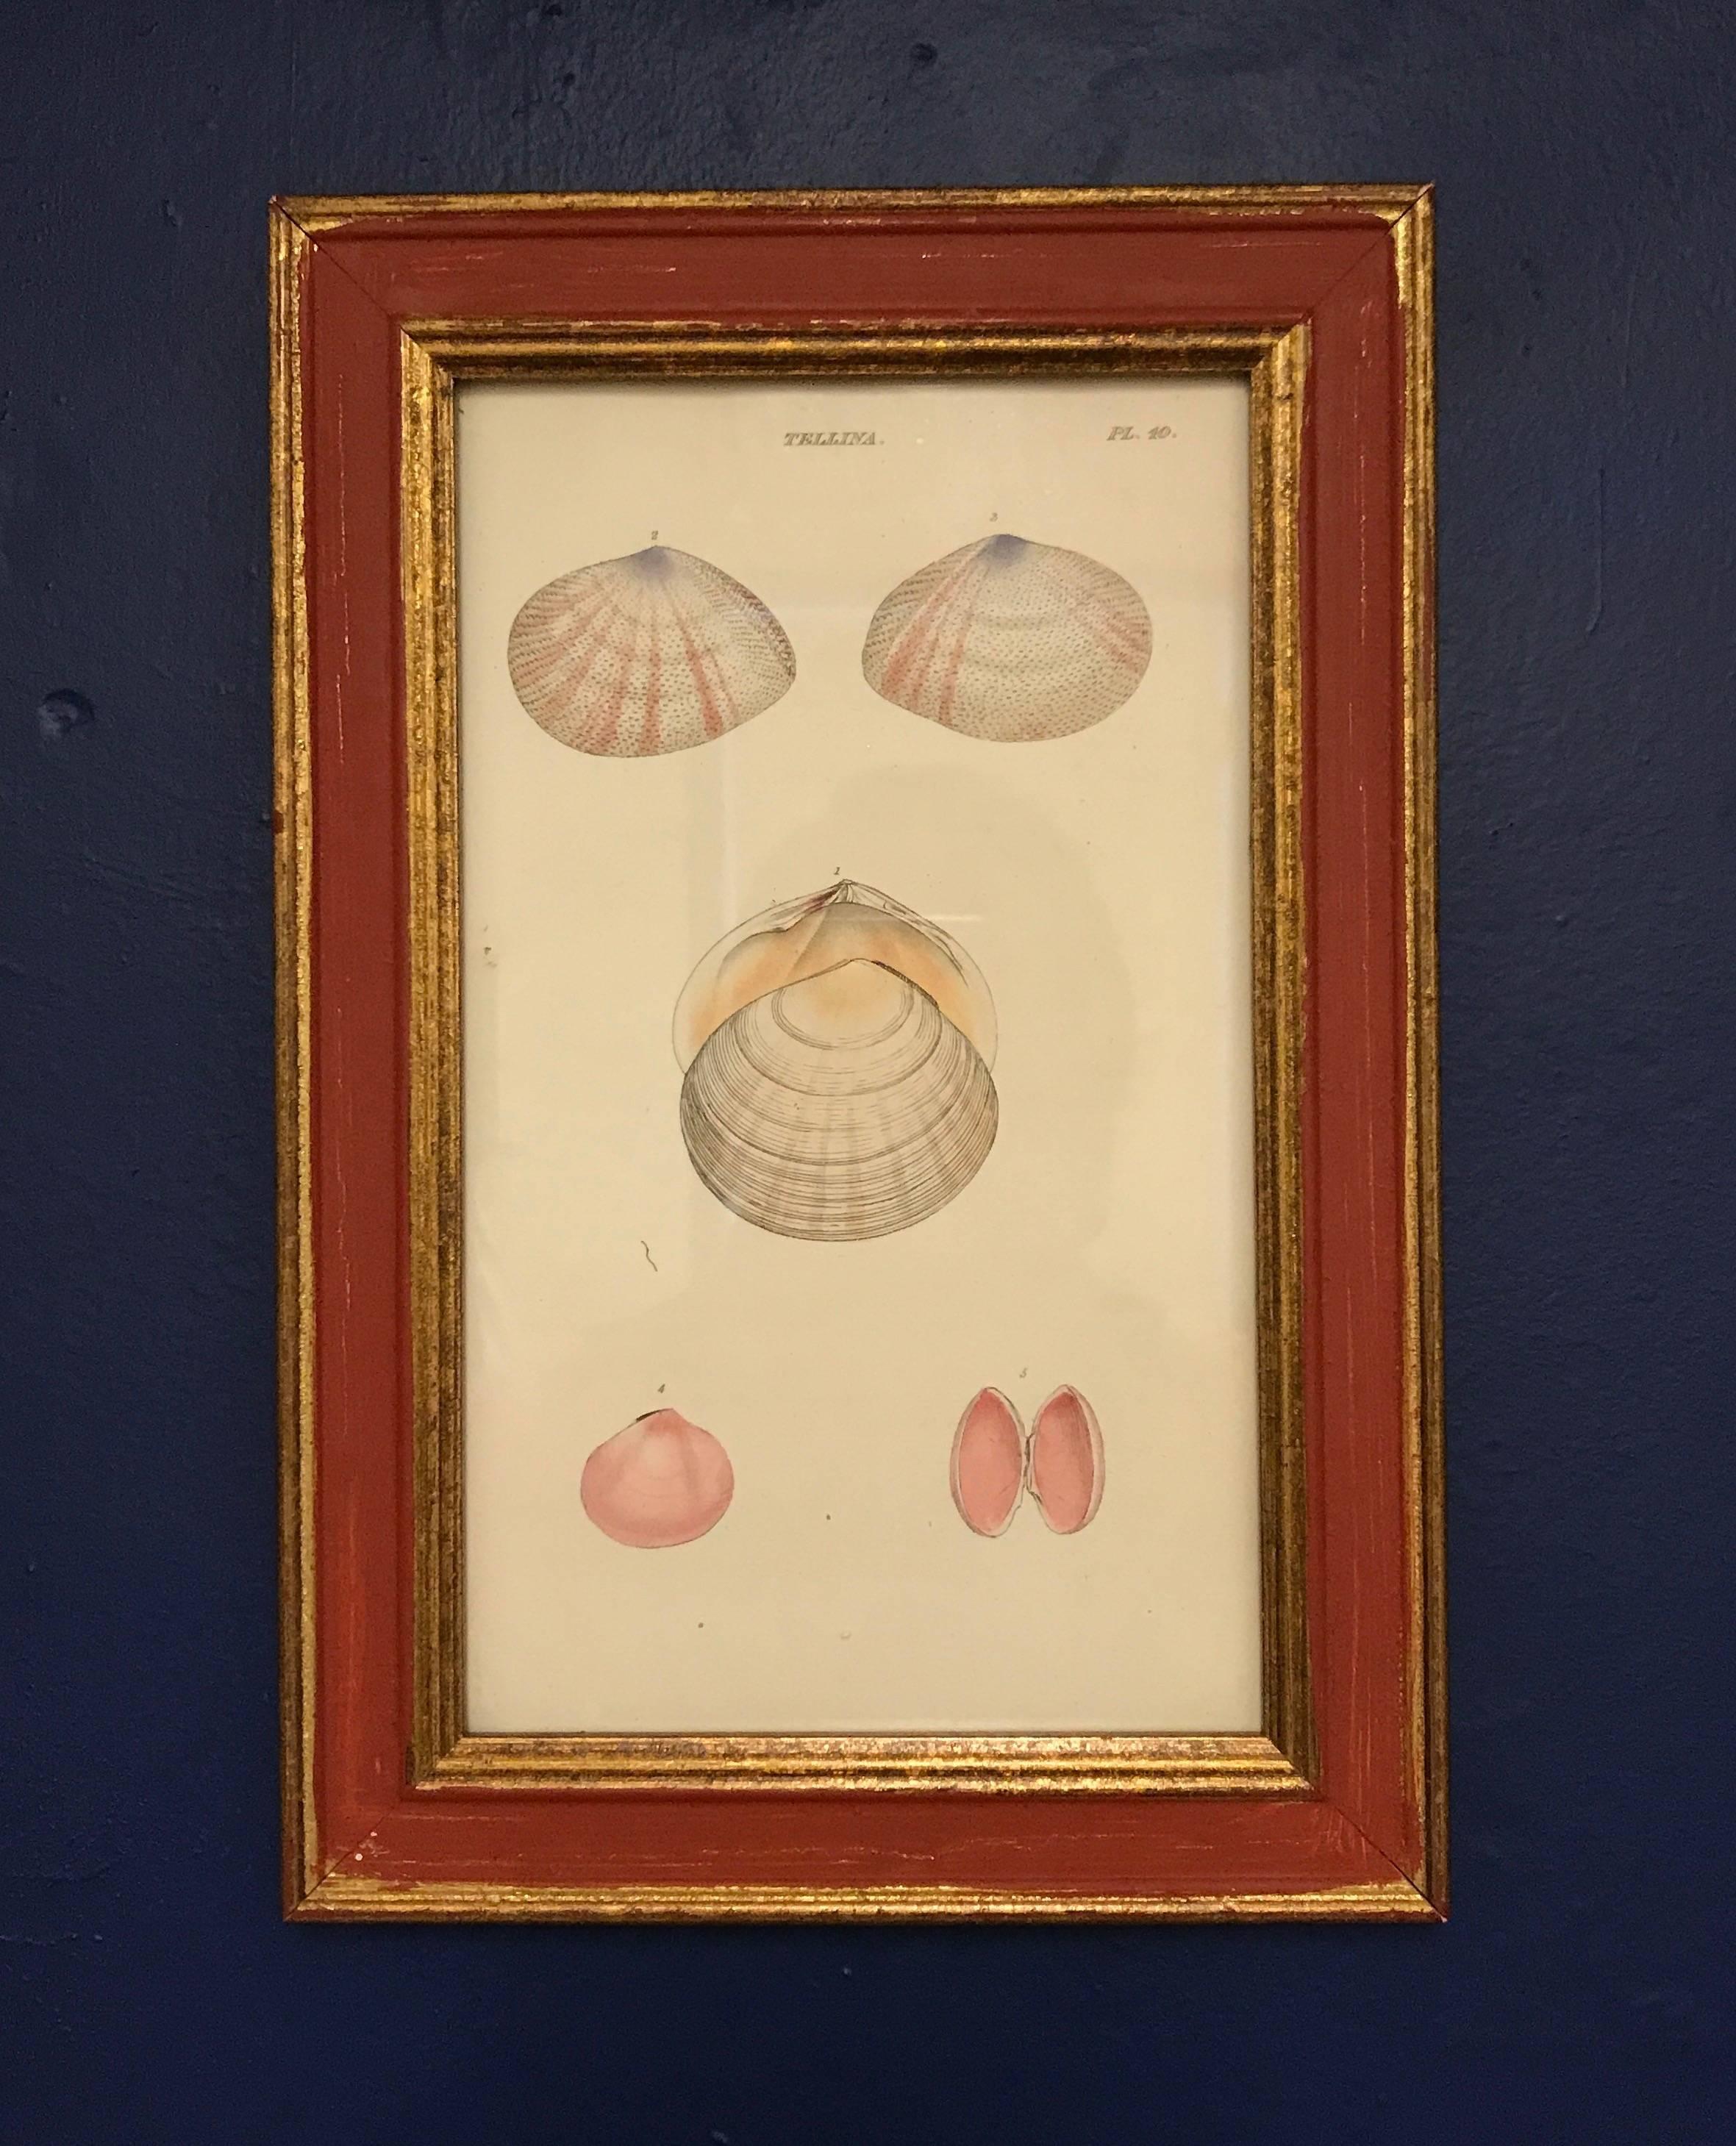 Lovely set of four shell engravings - by William Wood FRS, Britsh zoologist - from General Conchology, A Description of Shells, England 1815, hand decorated and red painted frames.